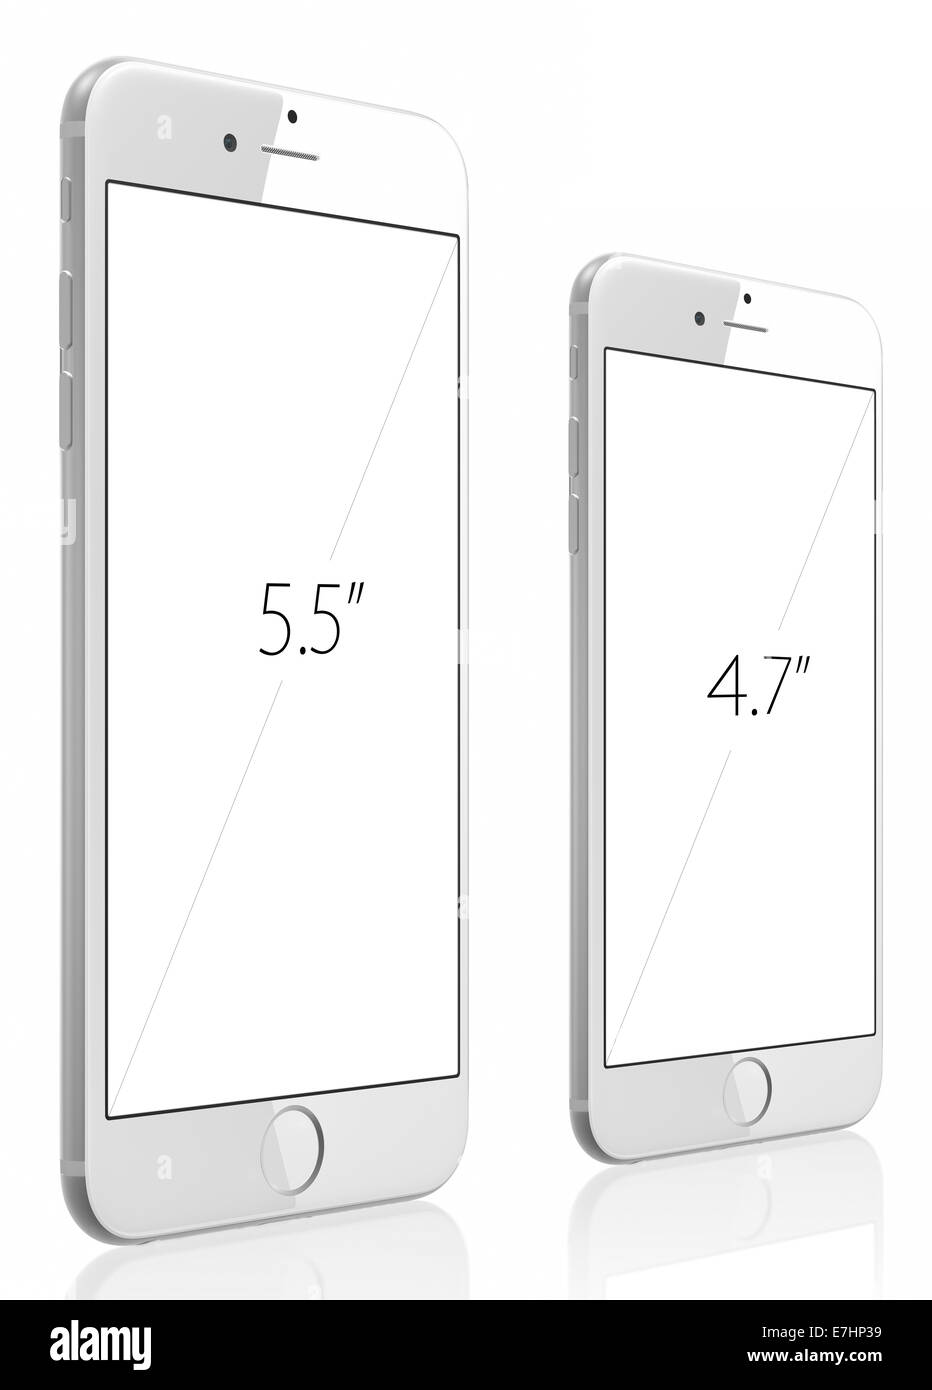 Apple Silver iPhone 6 Plus and iPhone 6 witn blank screen. Stock Photo